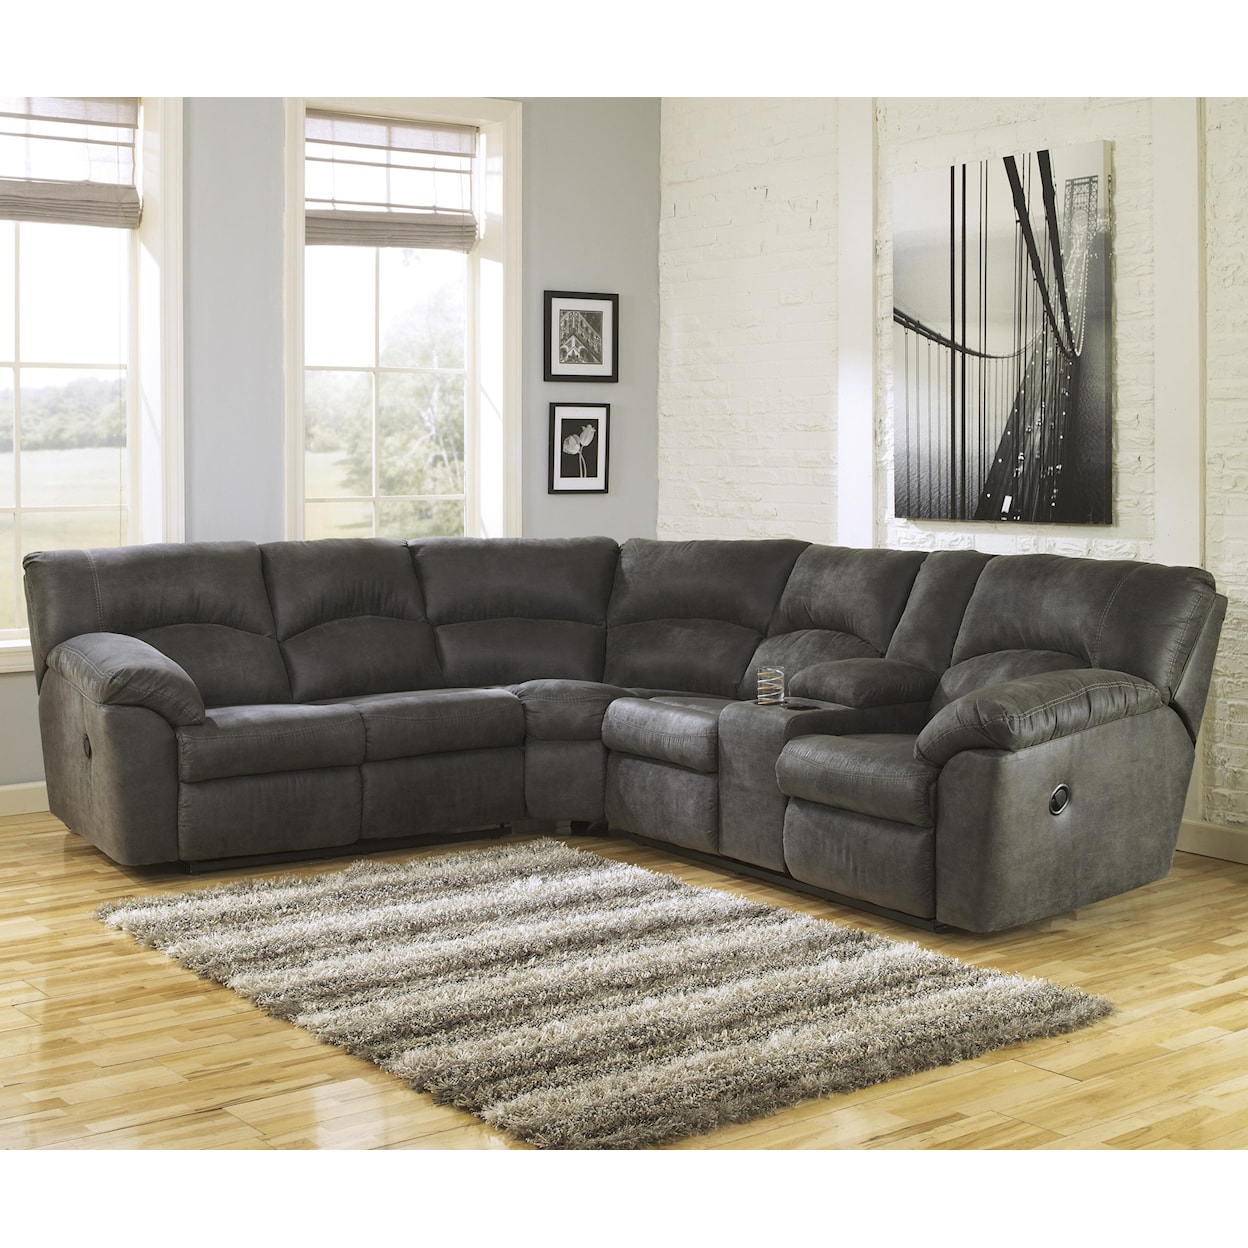 Ashley Tambo Tambo Reclining Sectional Couch